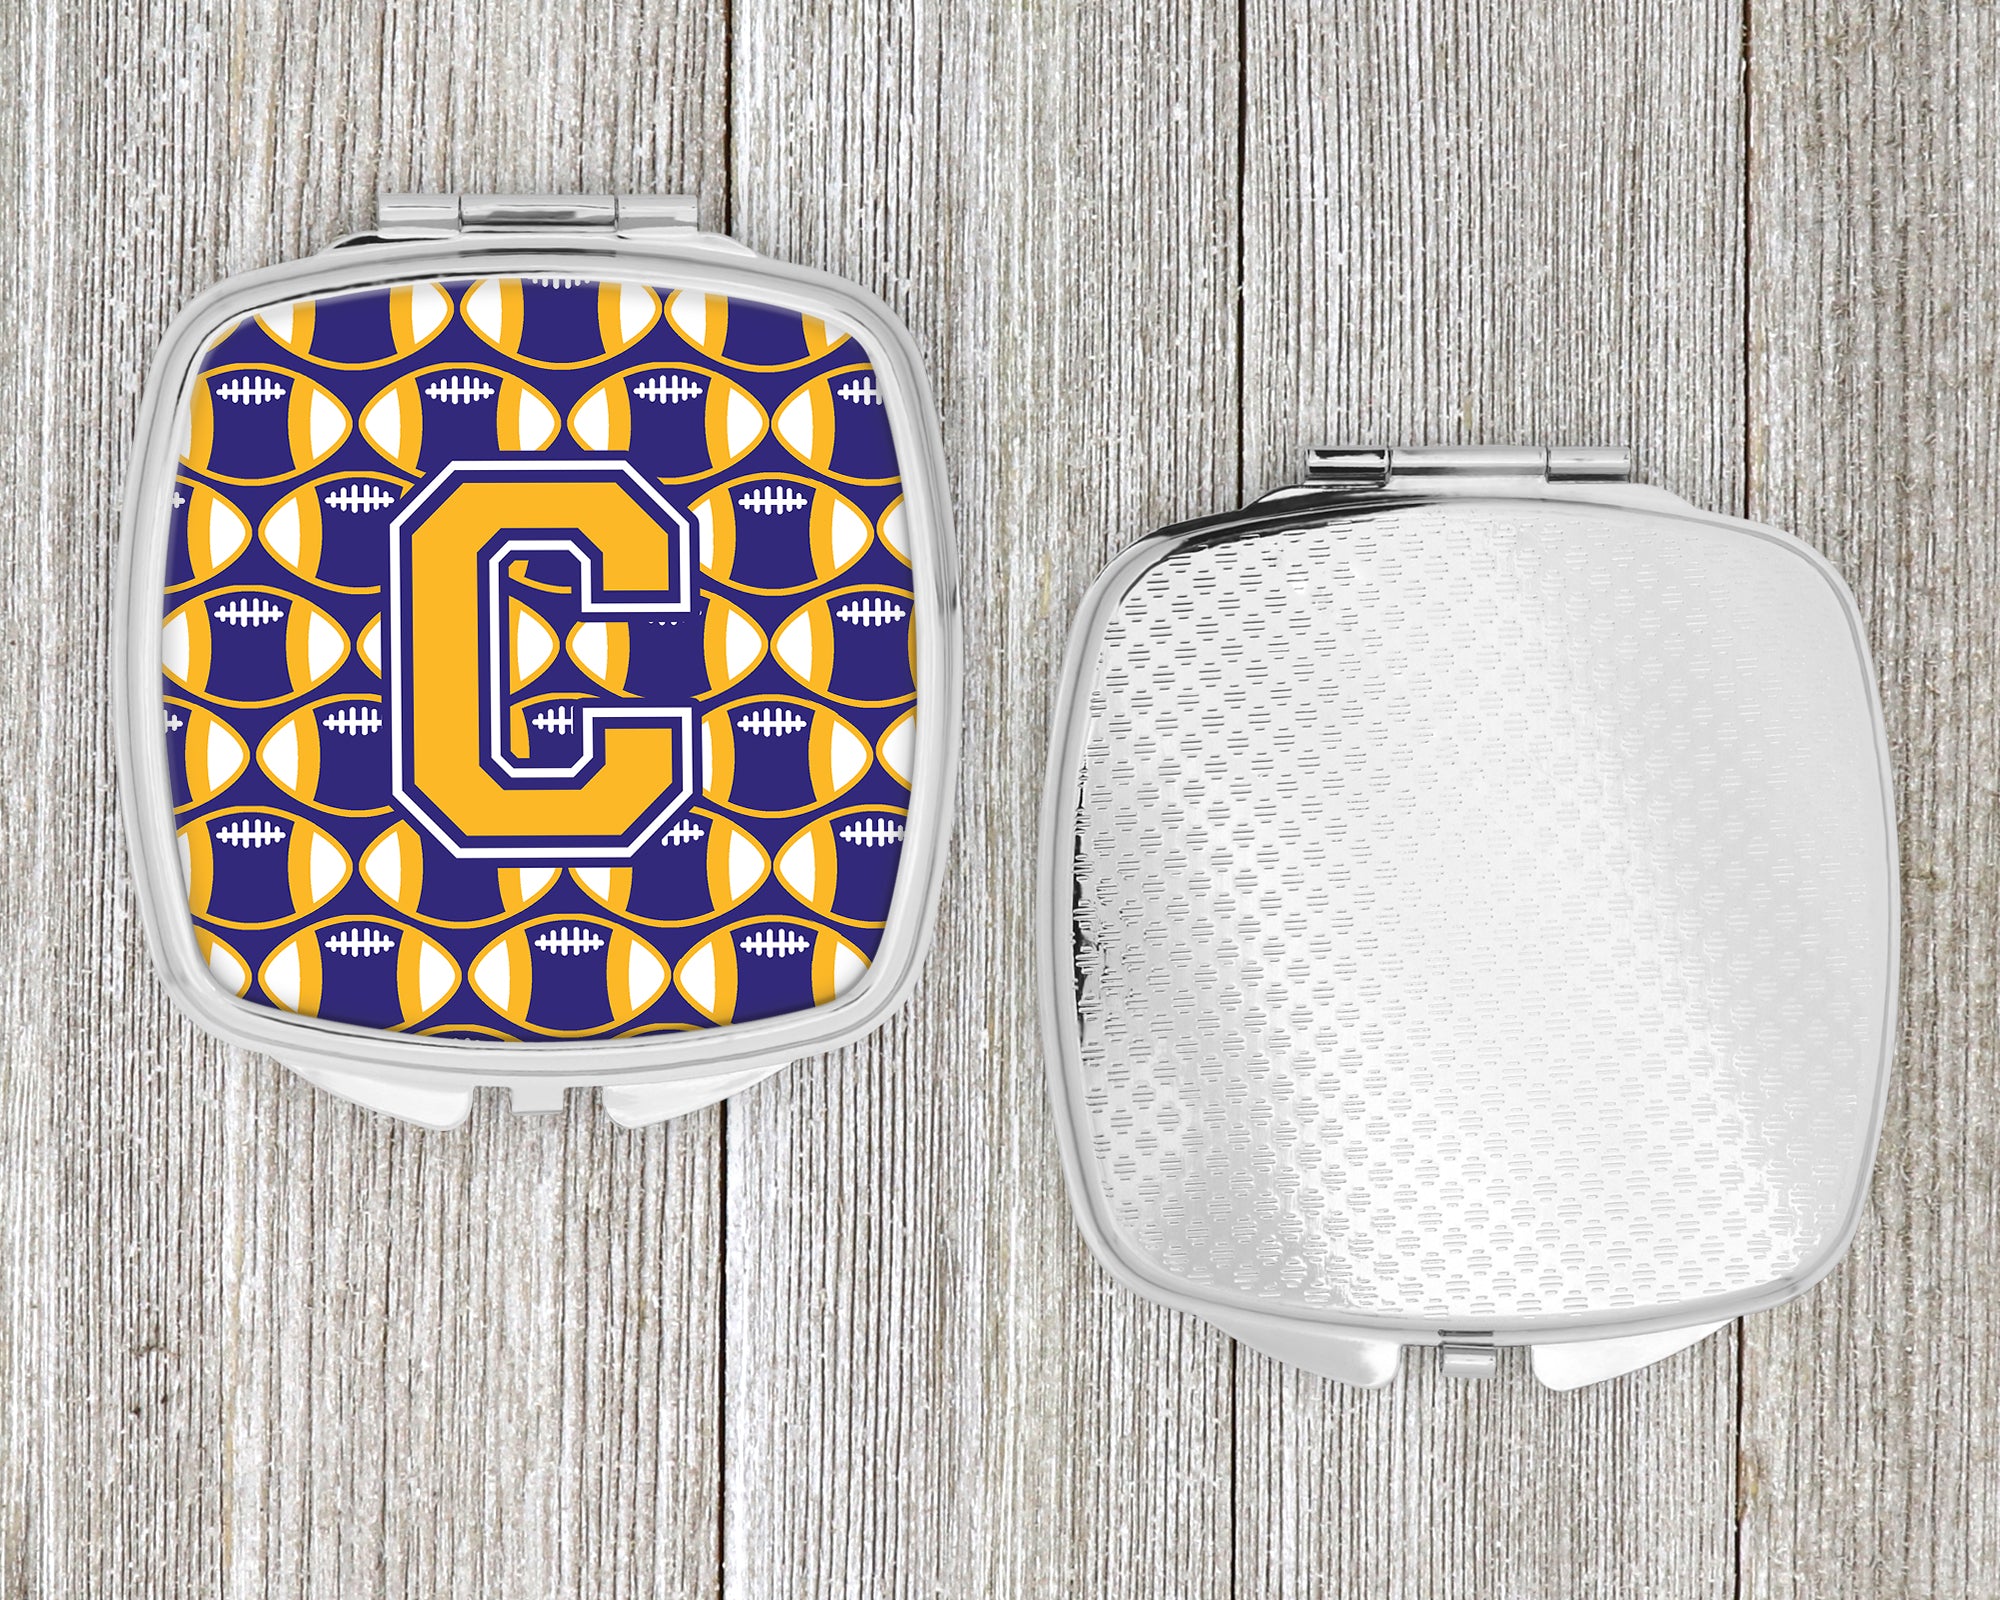 Letter C Football Purple and Gold Compact Mirror CJ1064-CSCM